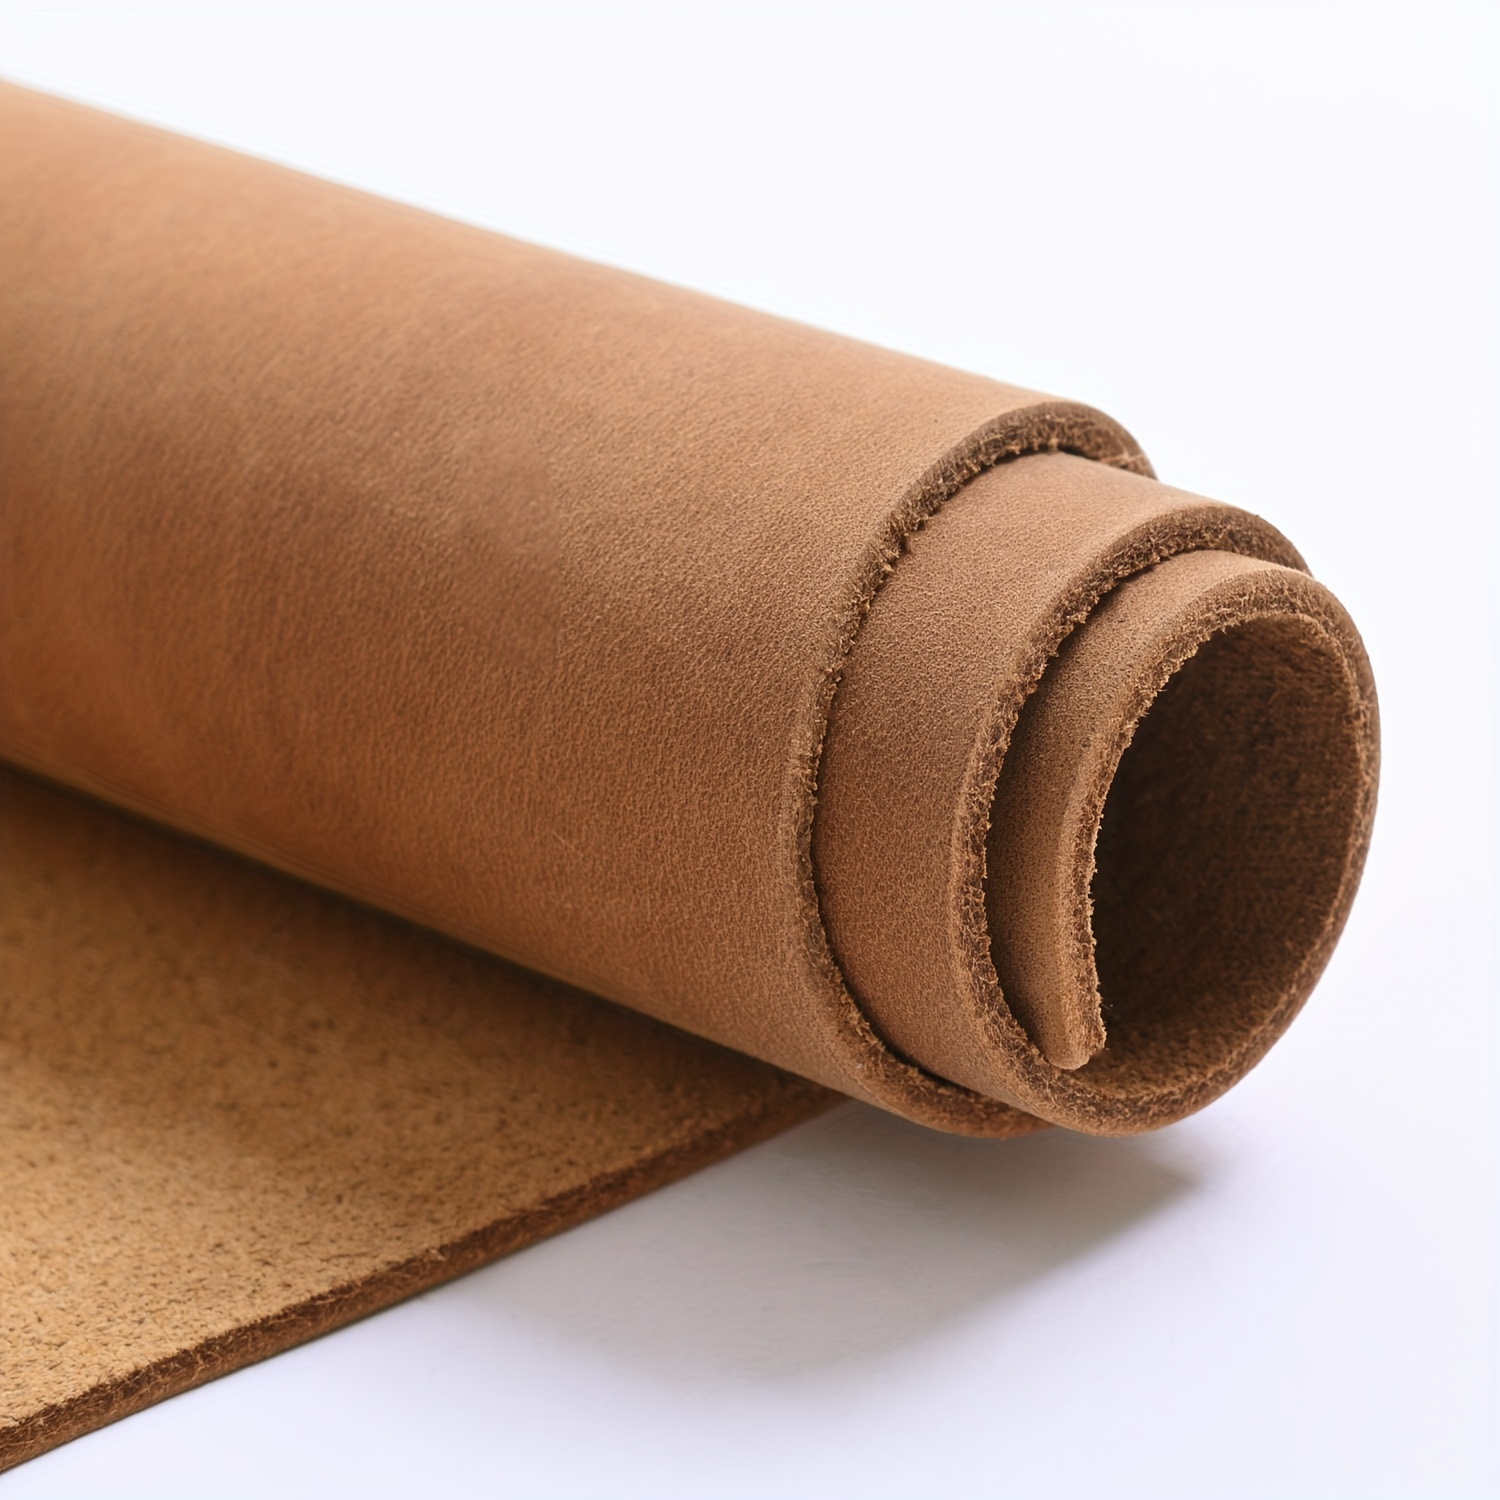 Full Grain Leather Pieces for Leather Working, Tooling Leather Sheets for  Crafts Genuine Leather Material 1.8-2.1 mm Thick Leather Hide for Crafting